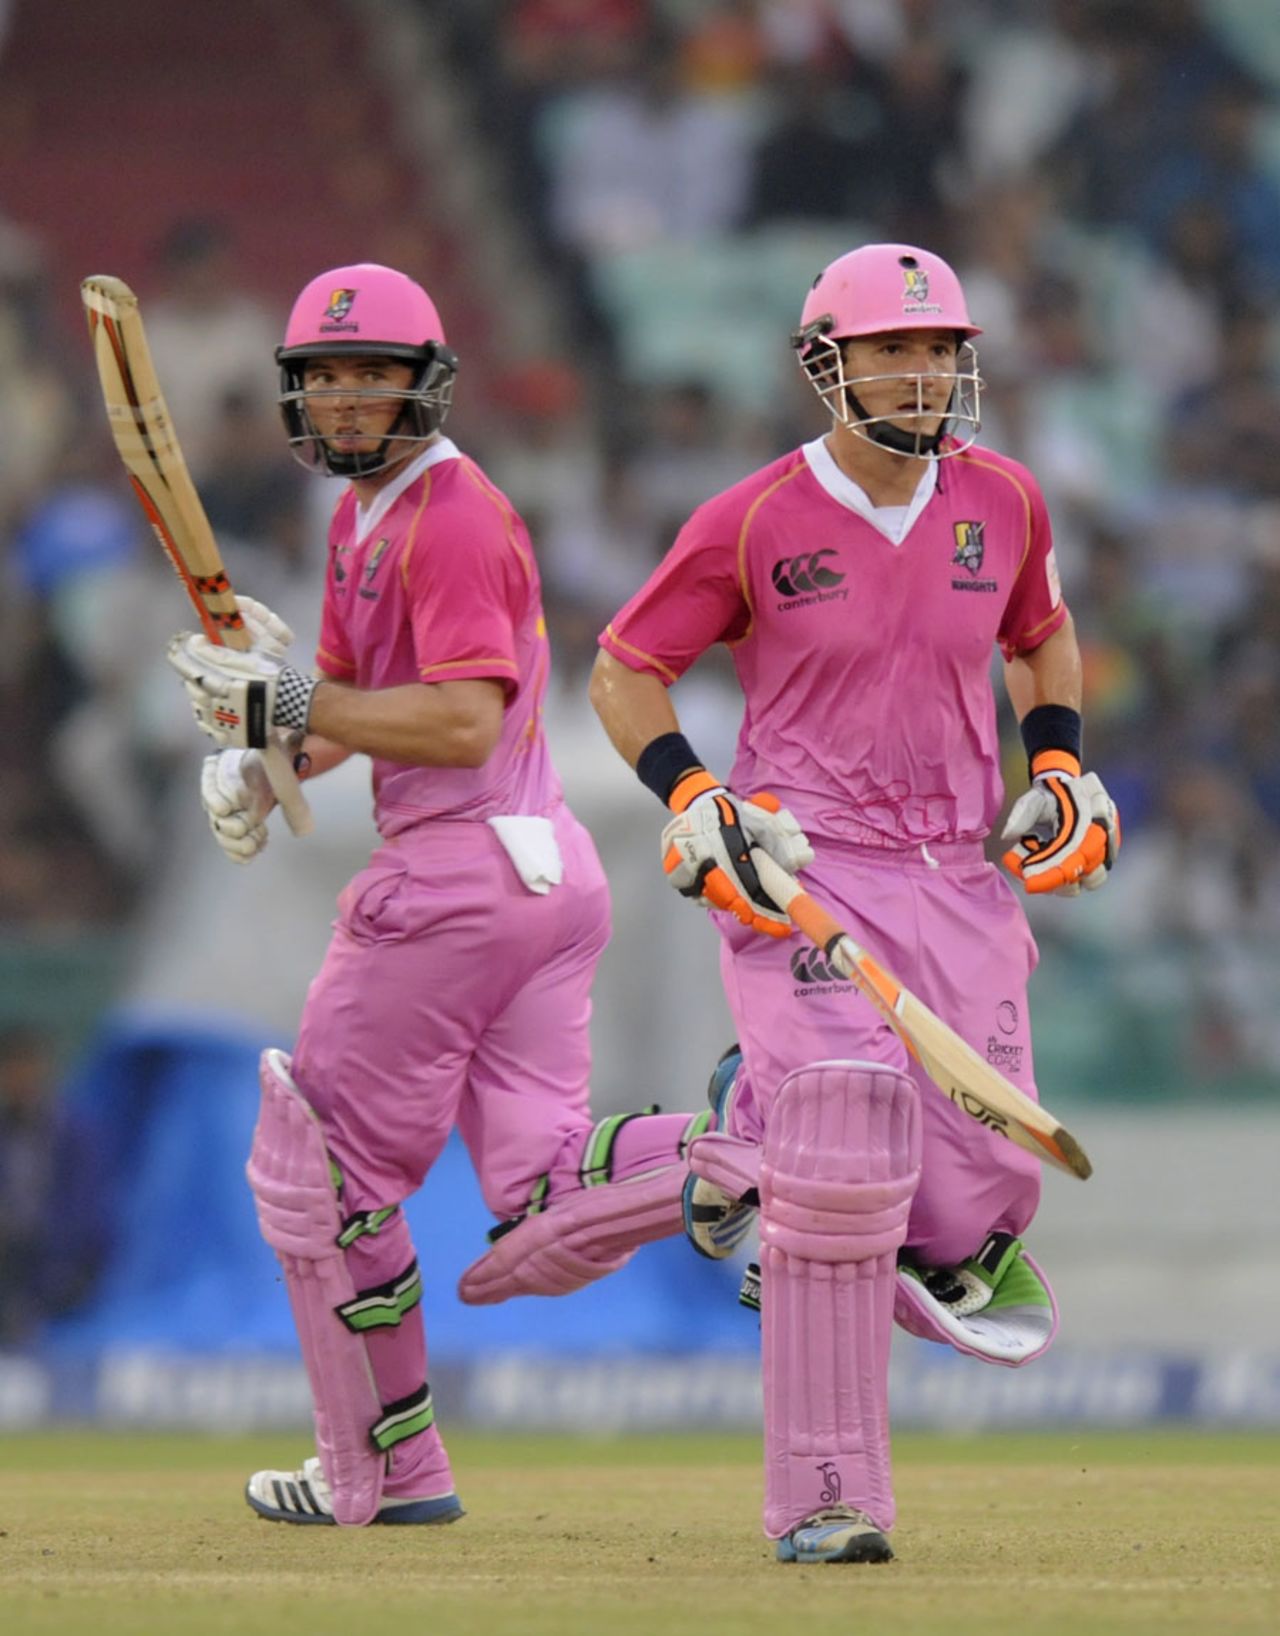 BJ Watling and Daniel Flynn added 90 for the fourth wicket, Northern Knights v Lahore Lions, CLT20, Raipur, September 14, 2014